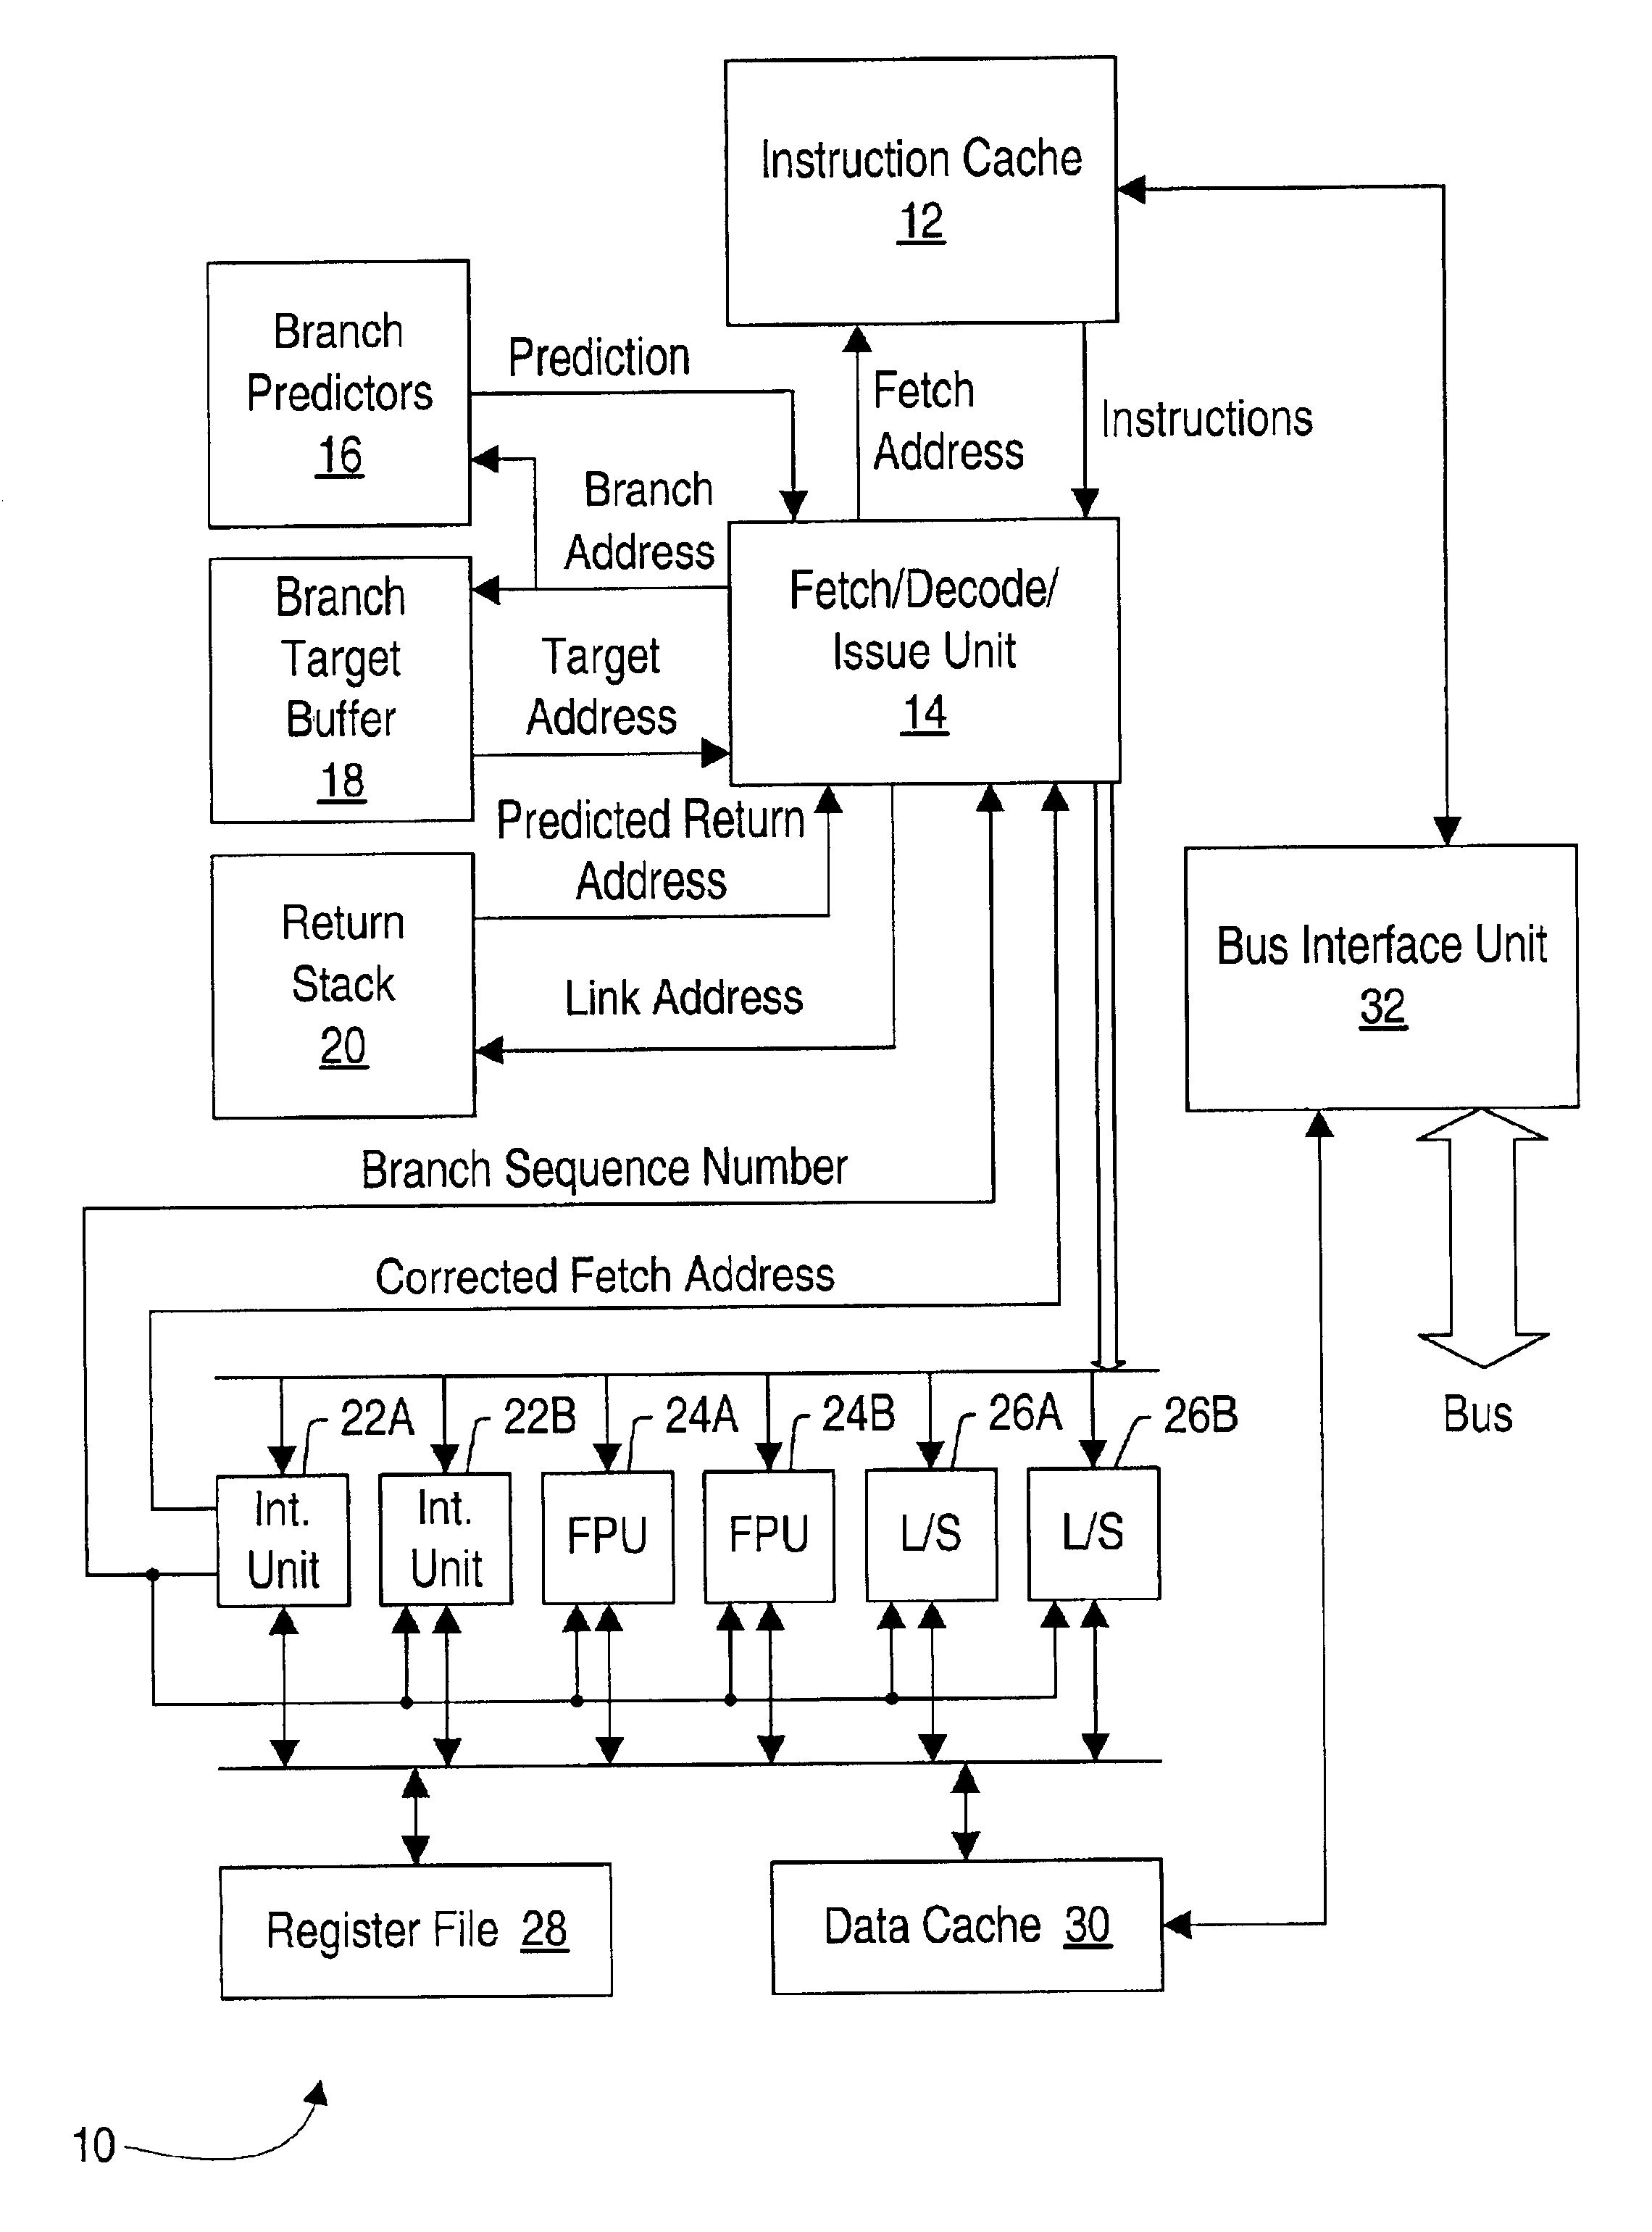 Method for cancelling conditional delay slot instructions